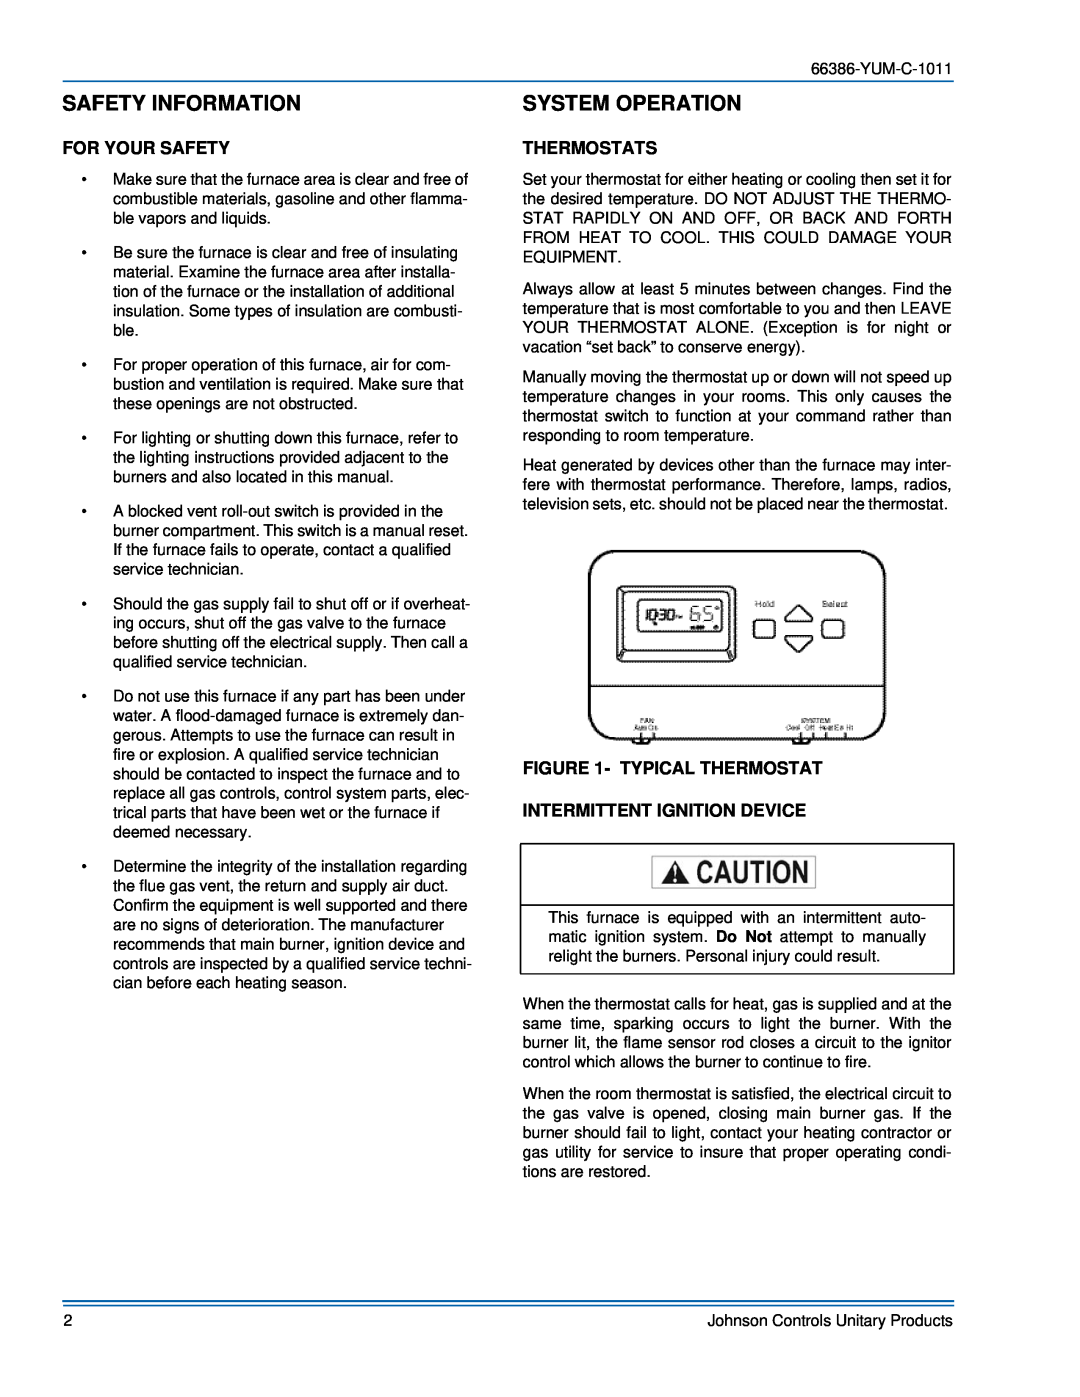 York 66386-YUM-C-1011 manual Safety Information, System Operation, For Your Safety, Thermostats, Typical Thermostat 